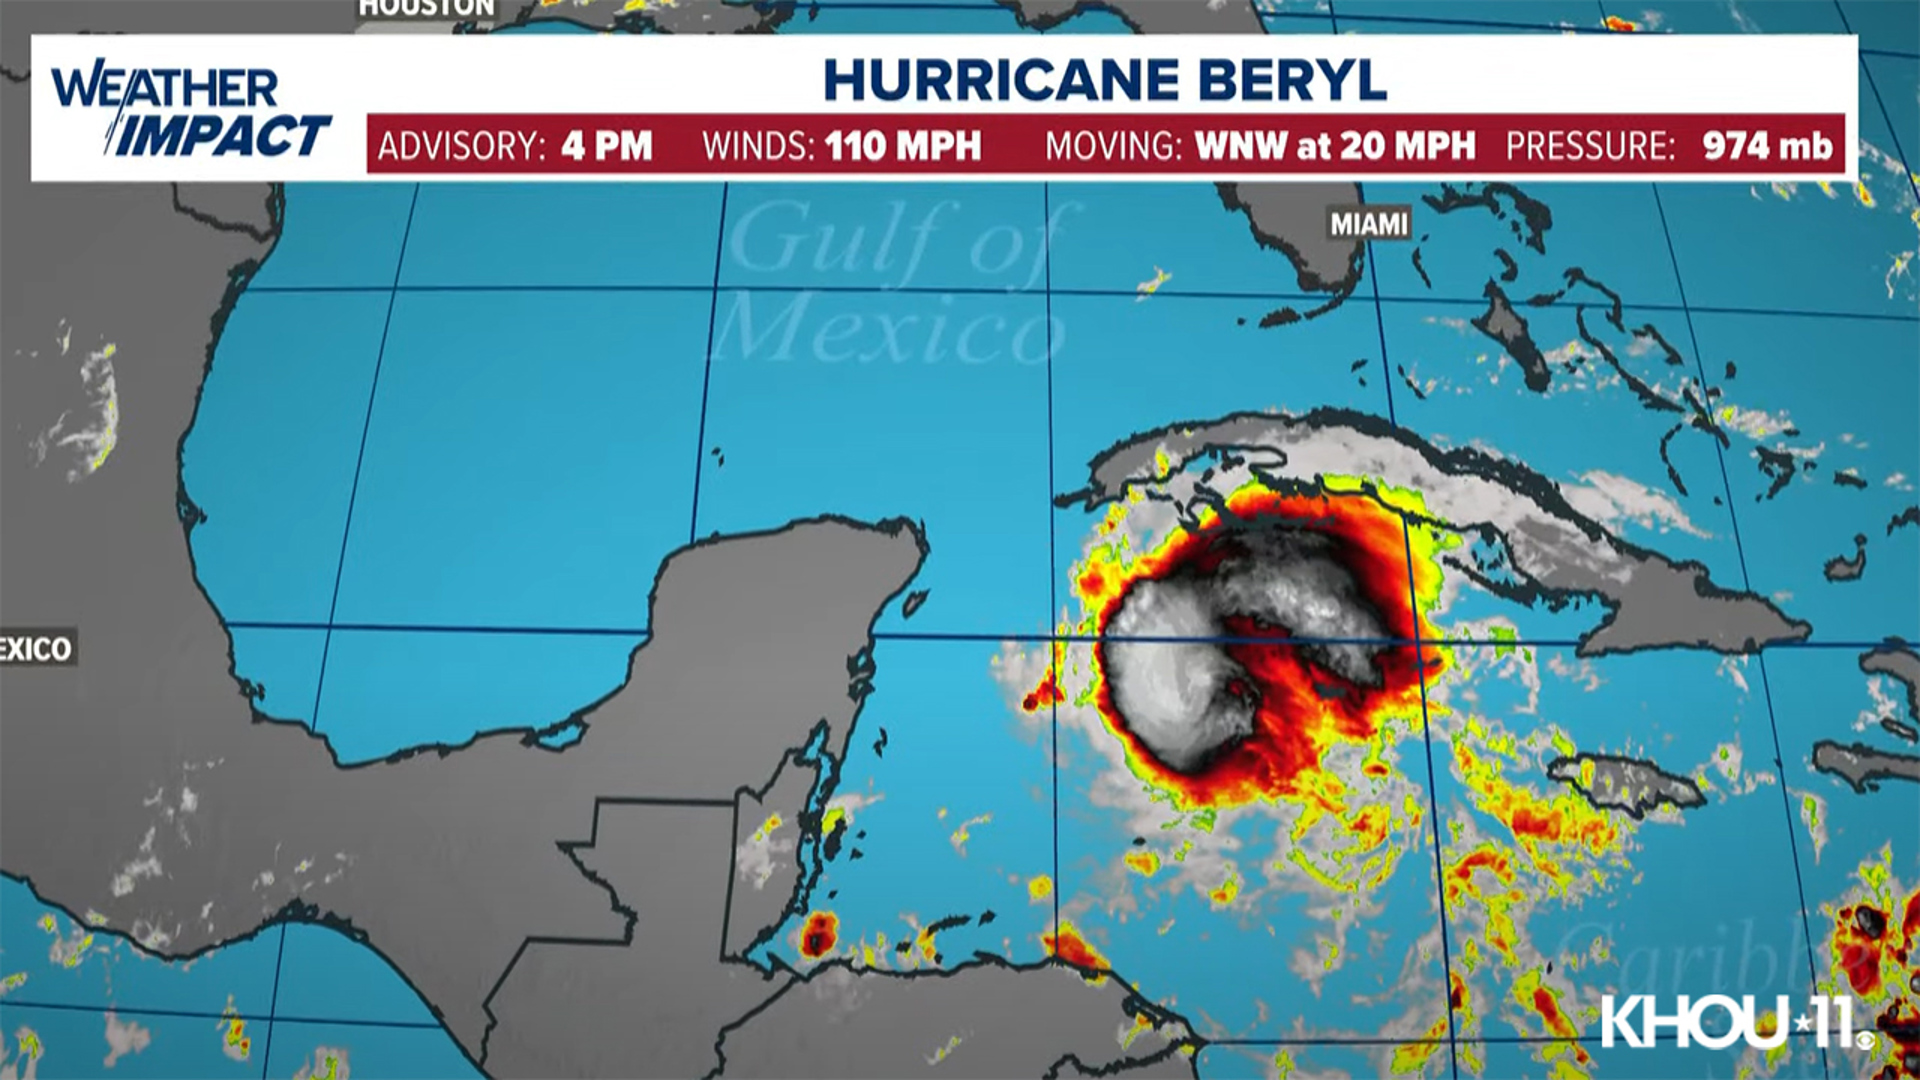 KHOU 11 Meteorologist Chris Ramirez on what effect the Yucatan Peninsula will have on Hurricane Beryl before it moves into the Gulf of Mexico.